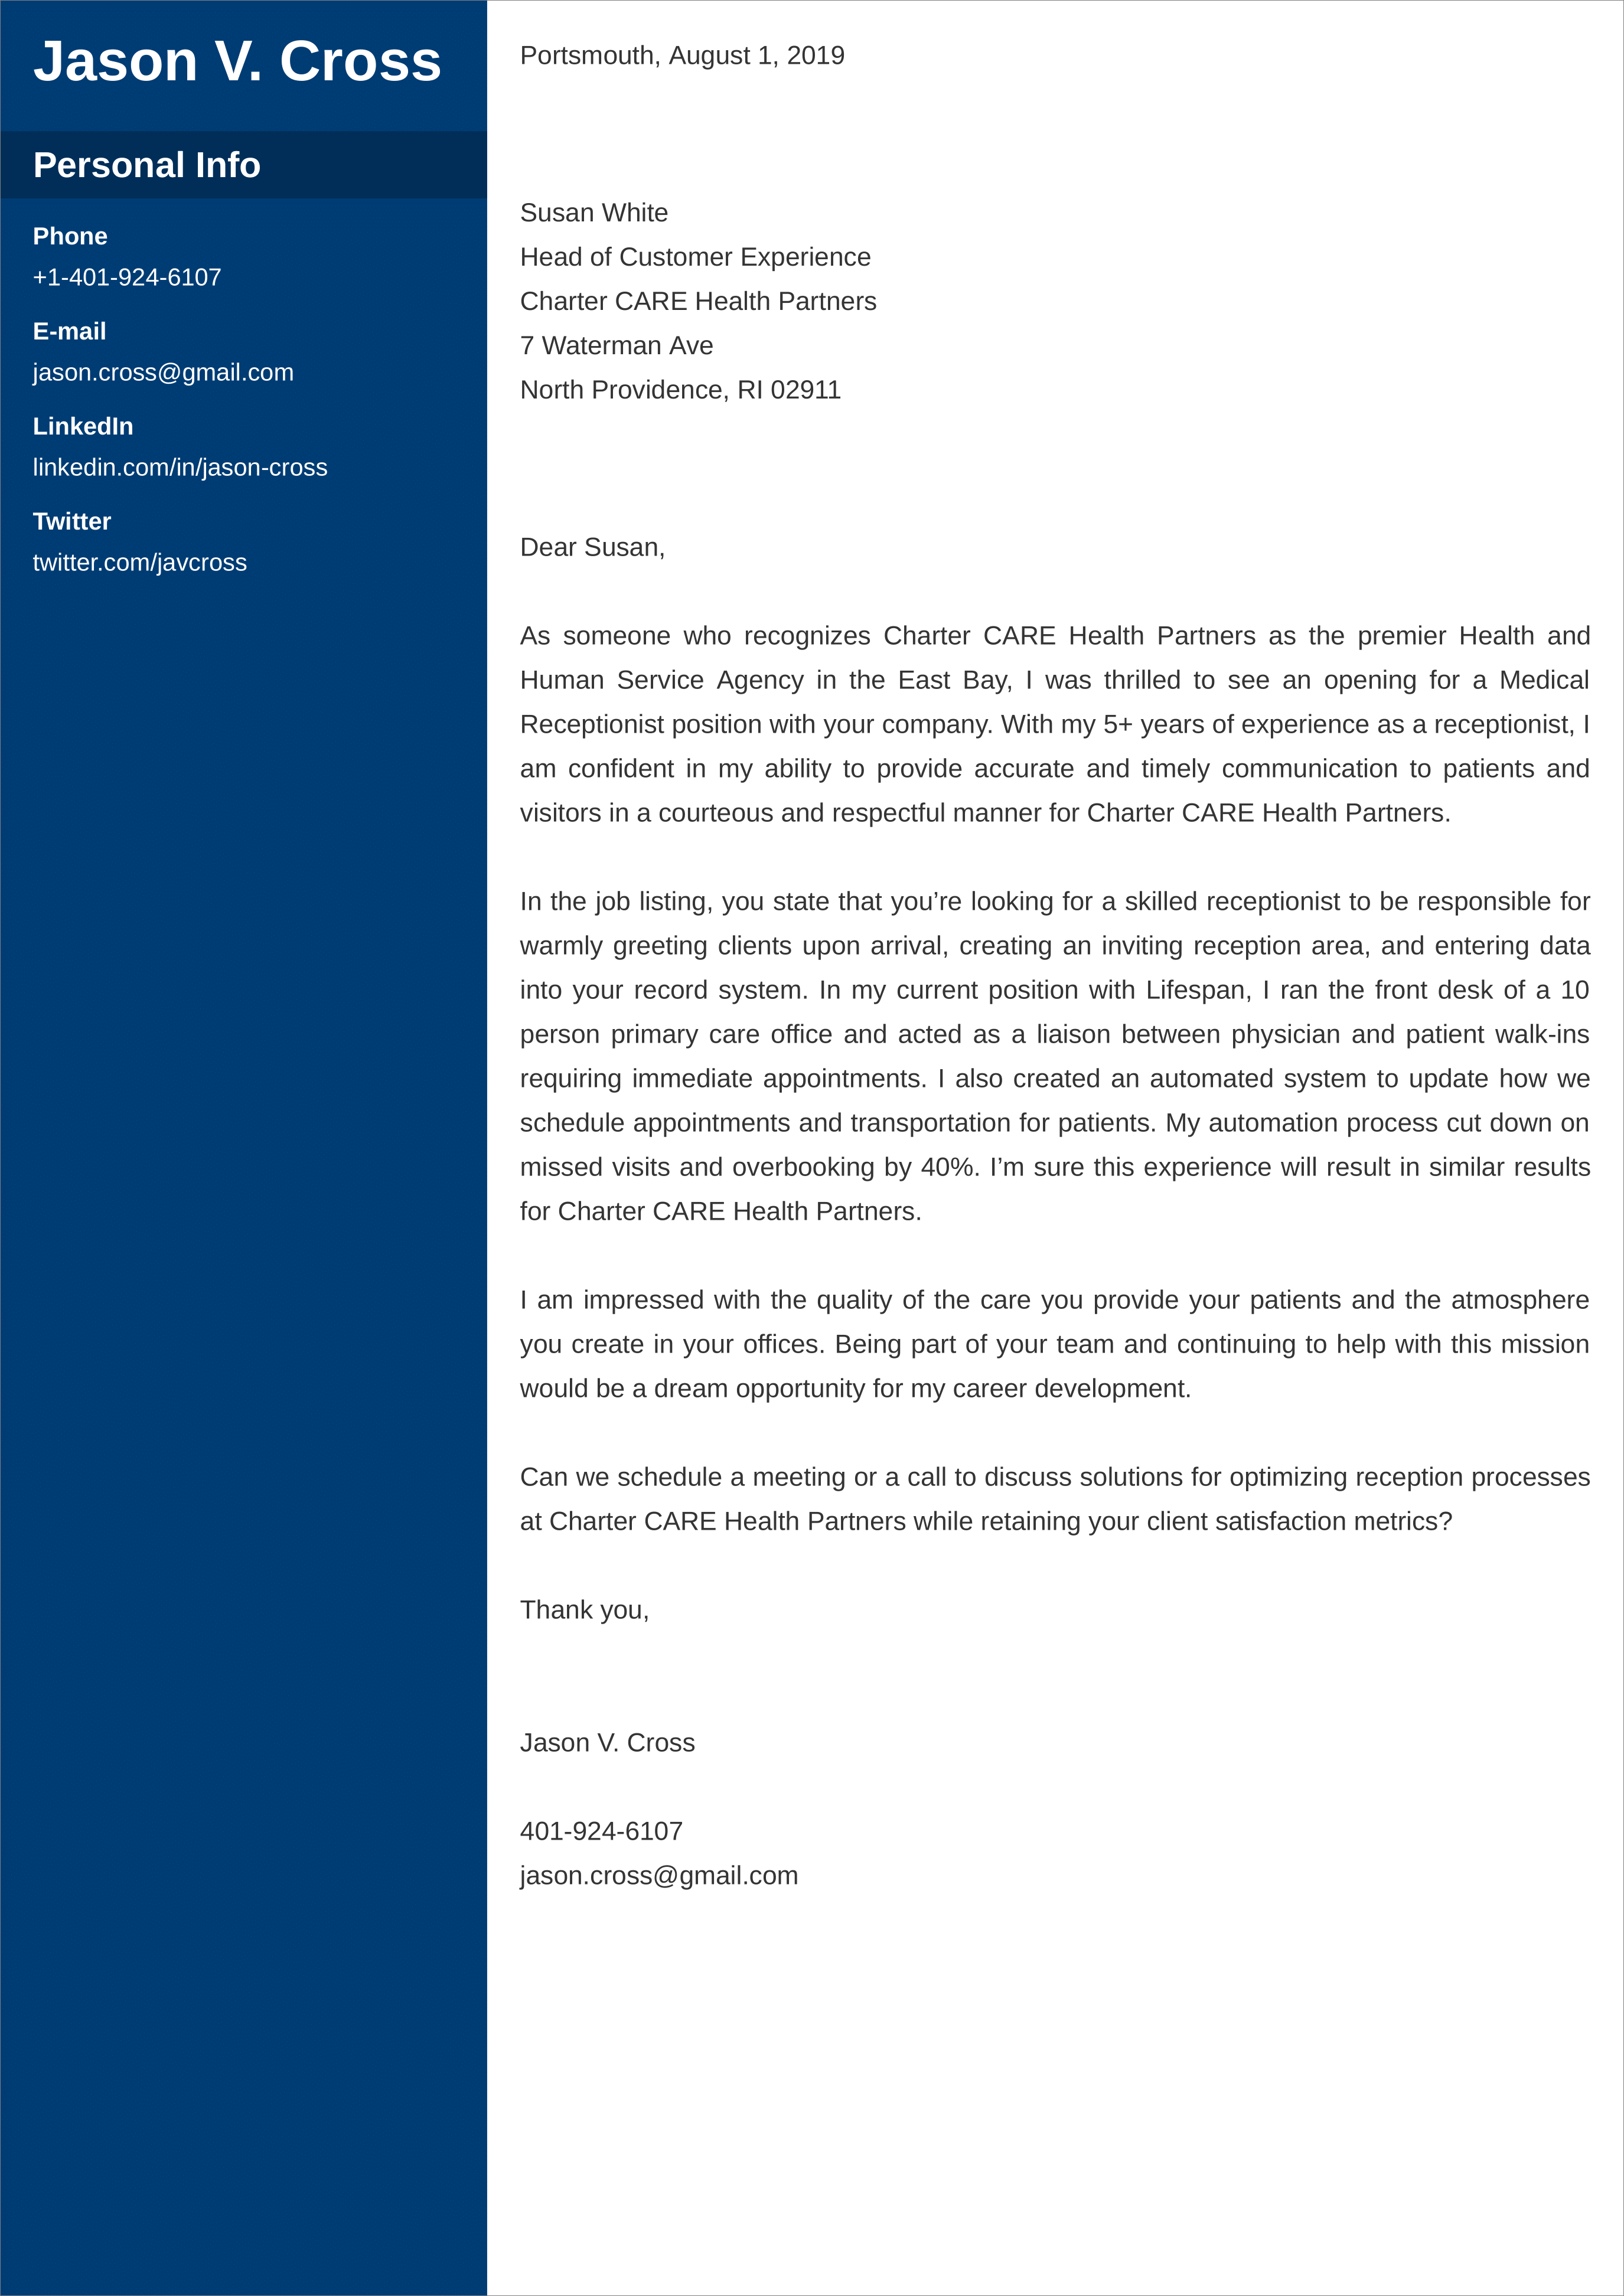 cover letter template example